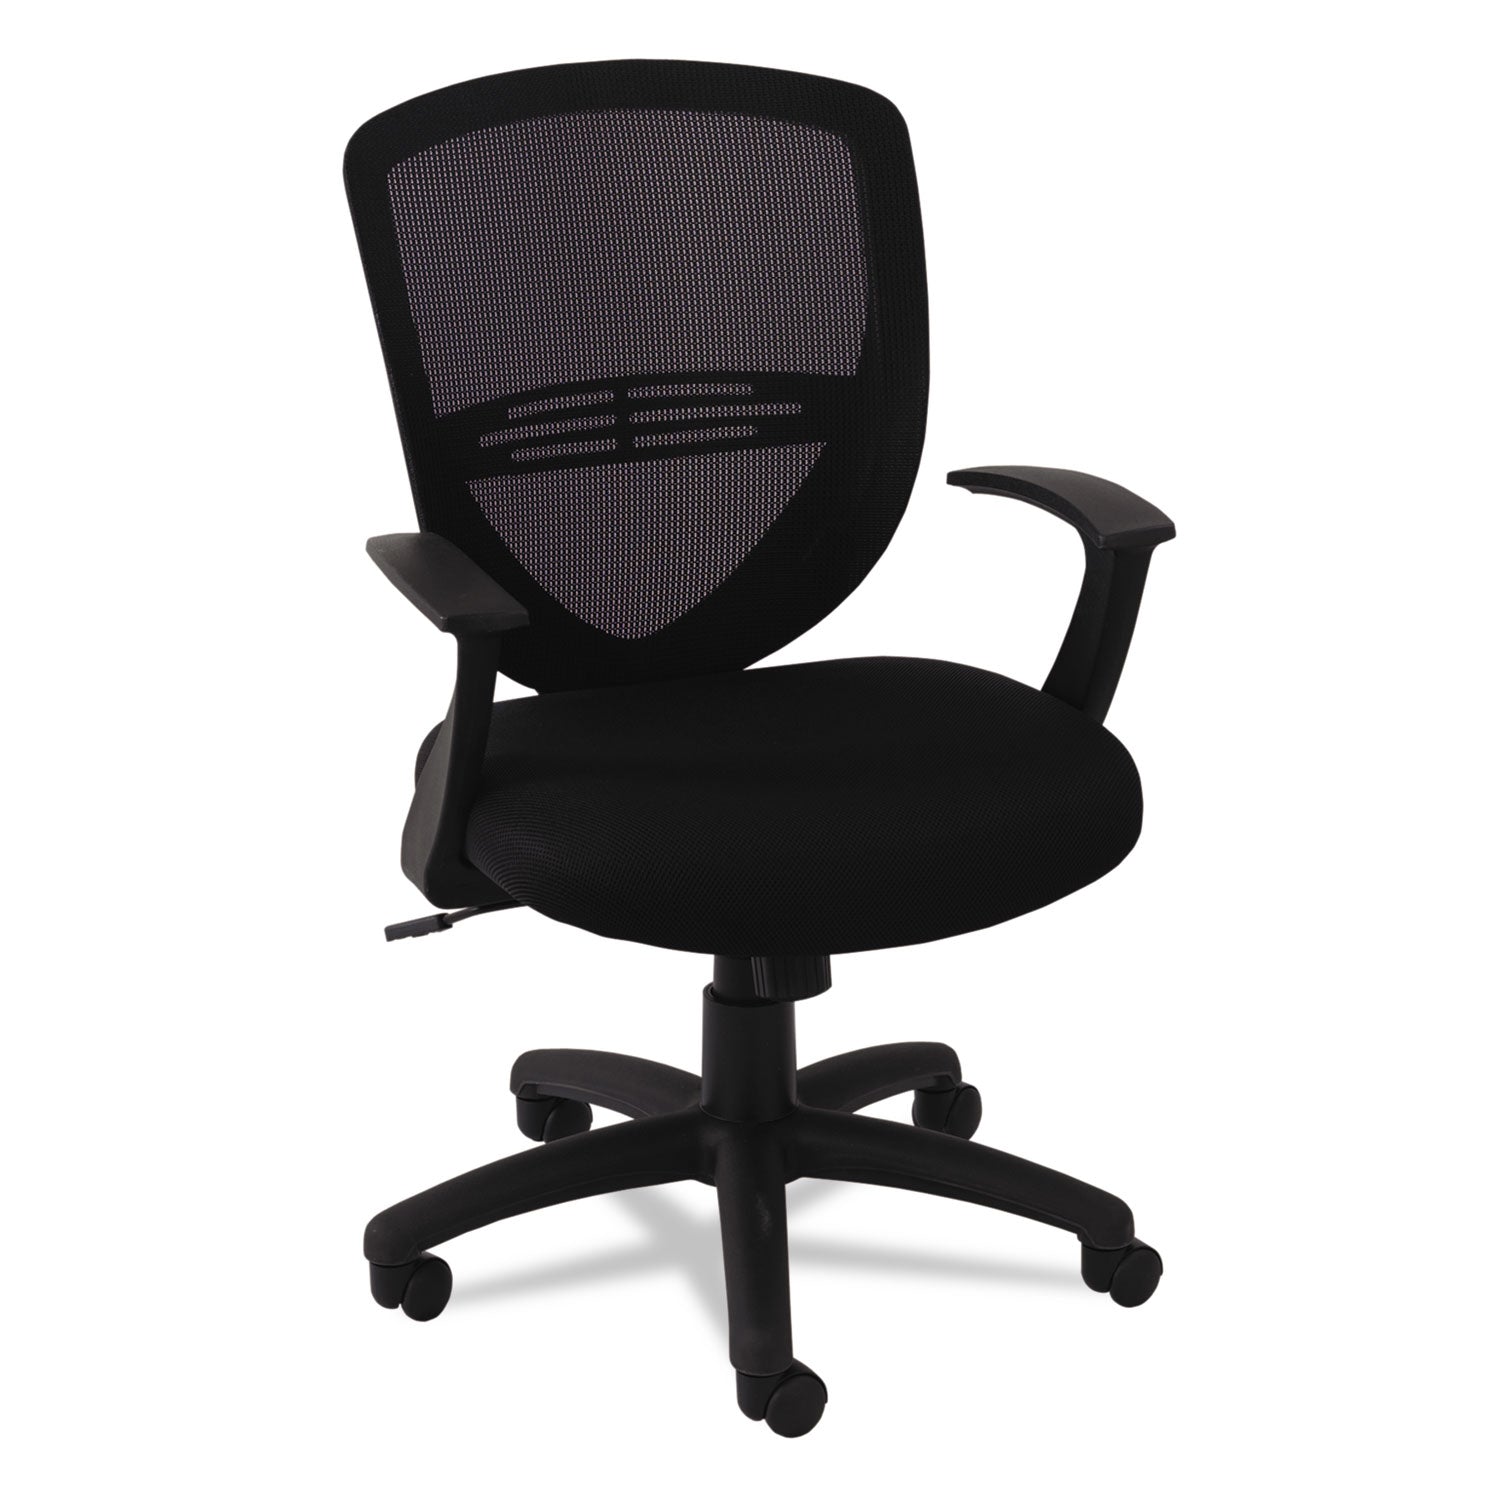 Swivel/Tilt Mesh Mid-Back Task Chair, Supports Up to 250 lb, 17.91" to 21.45" Seat Height, Black - 